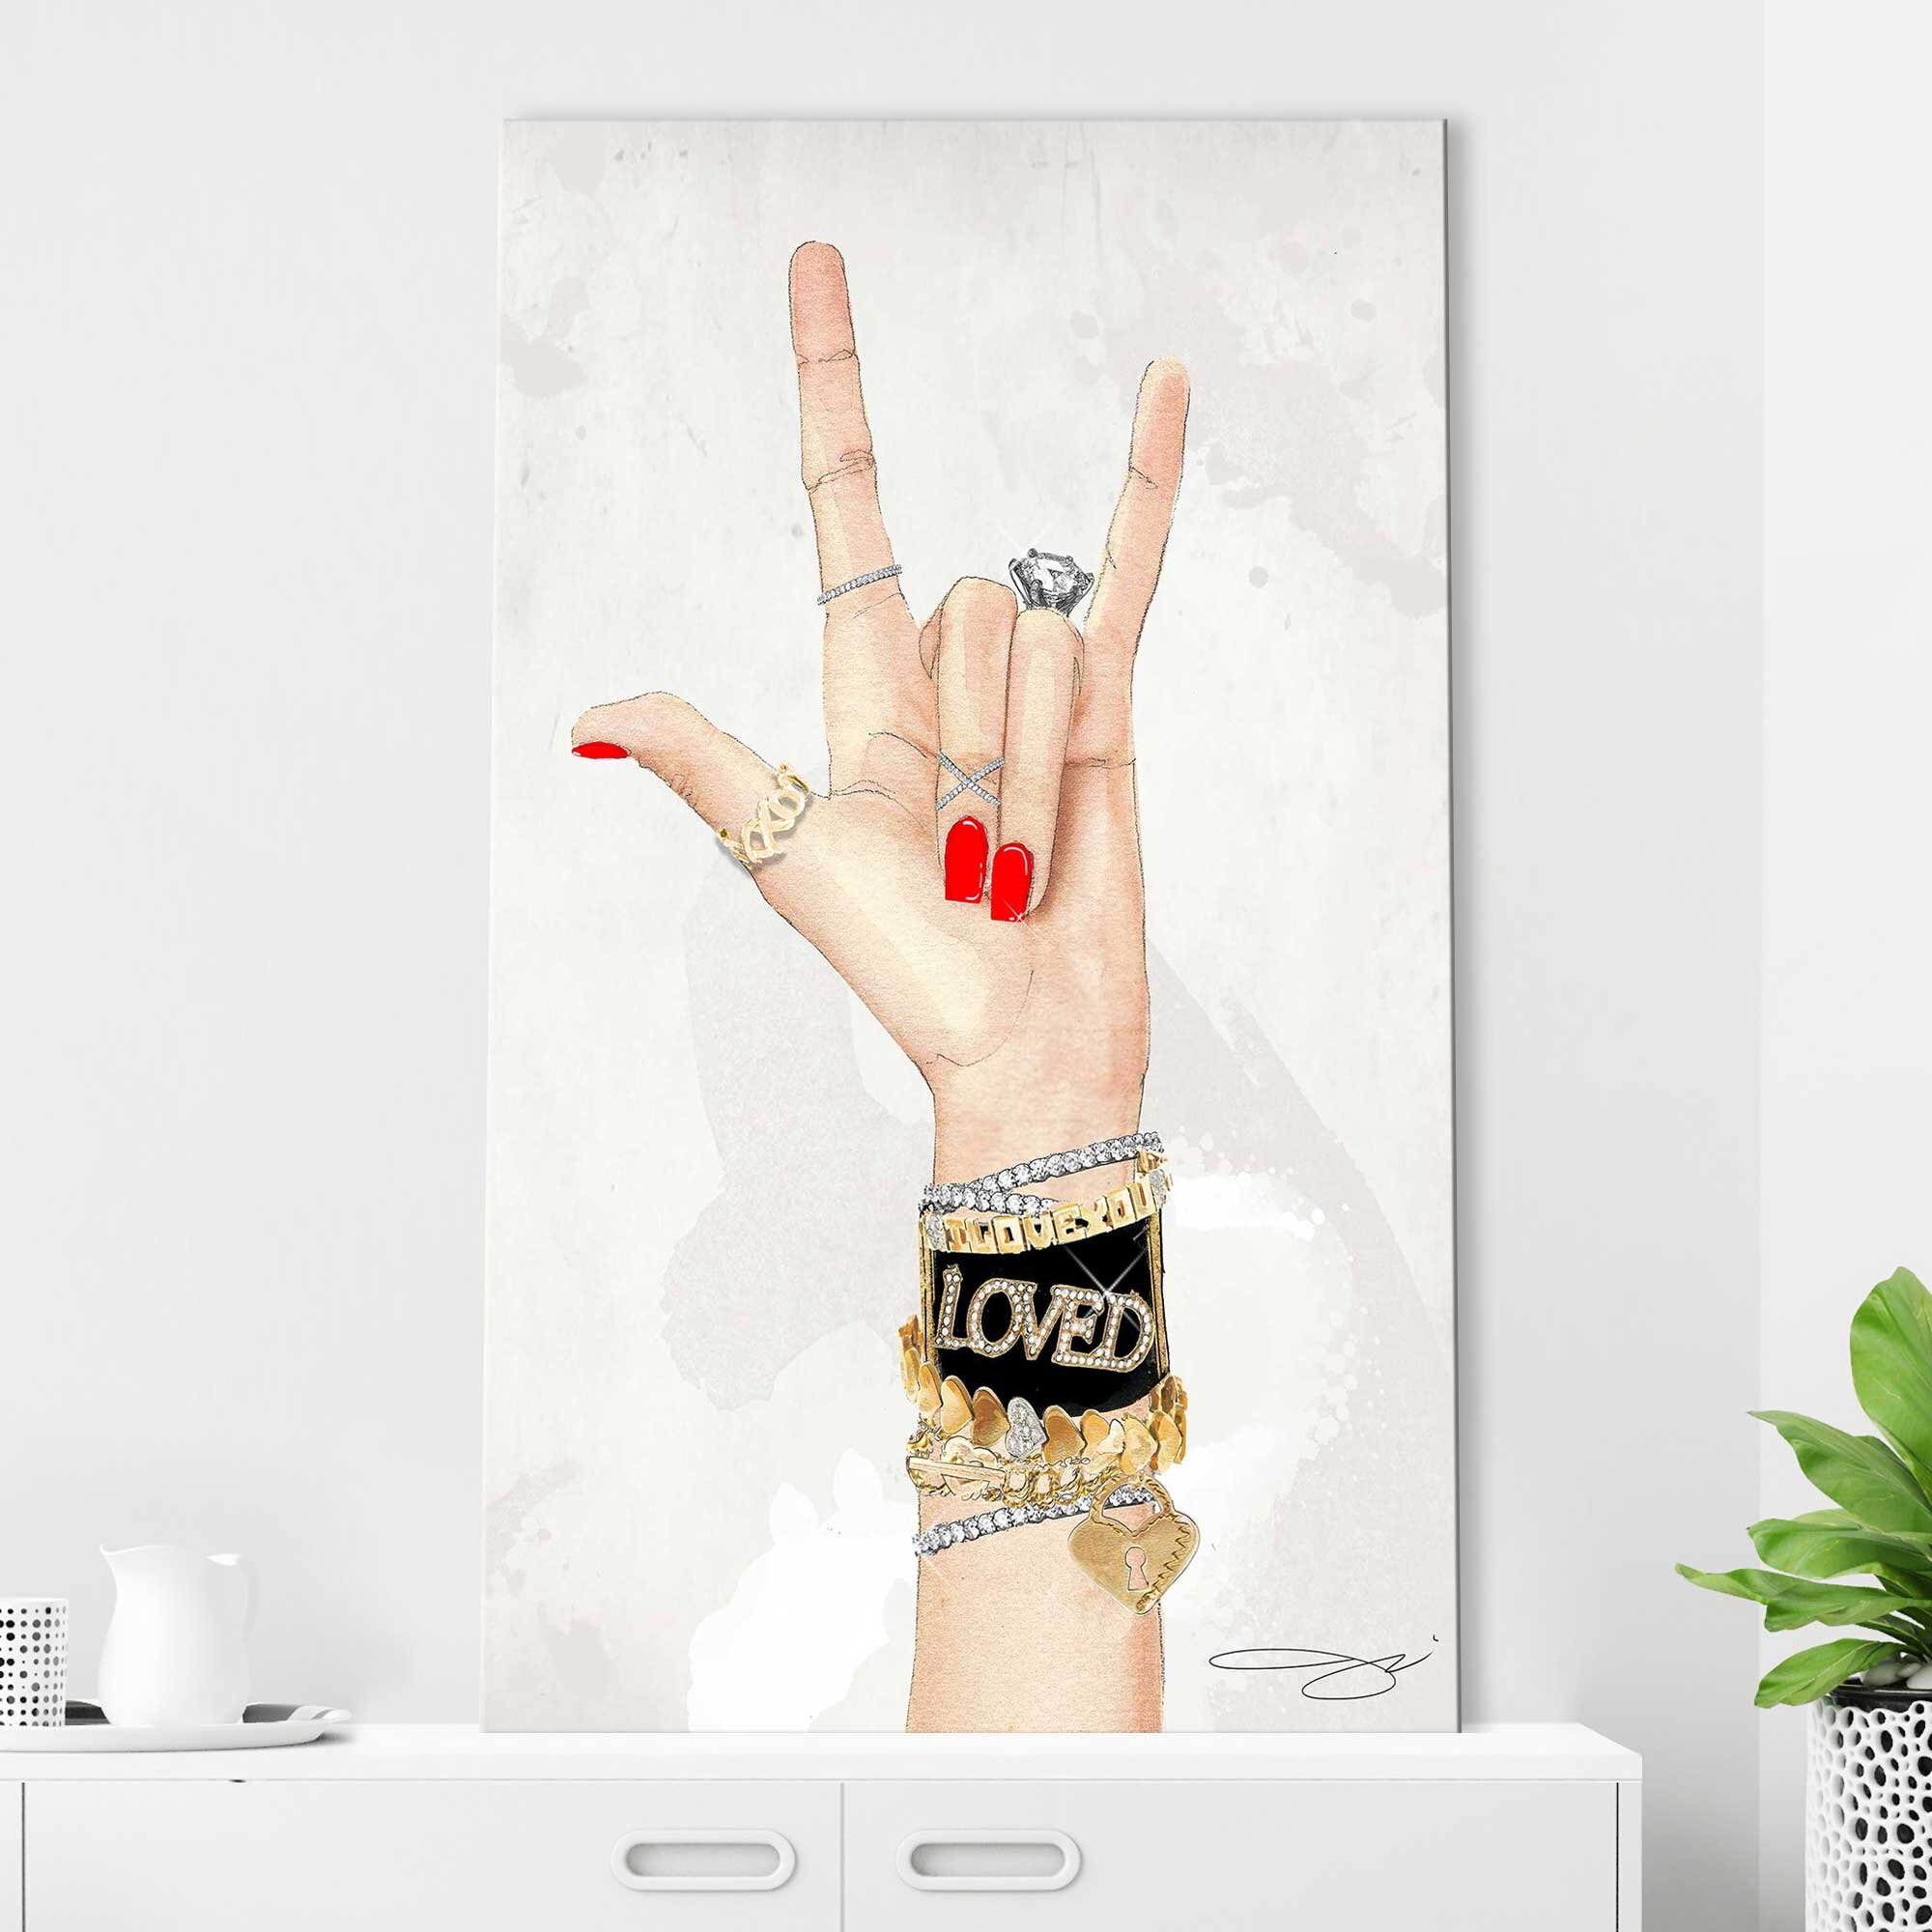 Craving Louis Vuitton (Vertical) by by Jodi - Graphic Art Mercer41 Format: Silver Framed, Size: 27.5 H x 21.5 W x 0.75 D